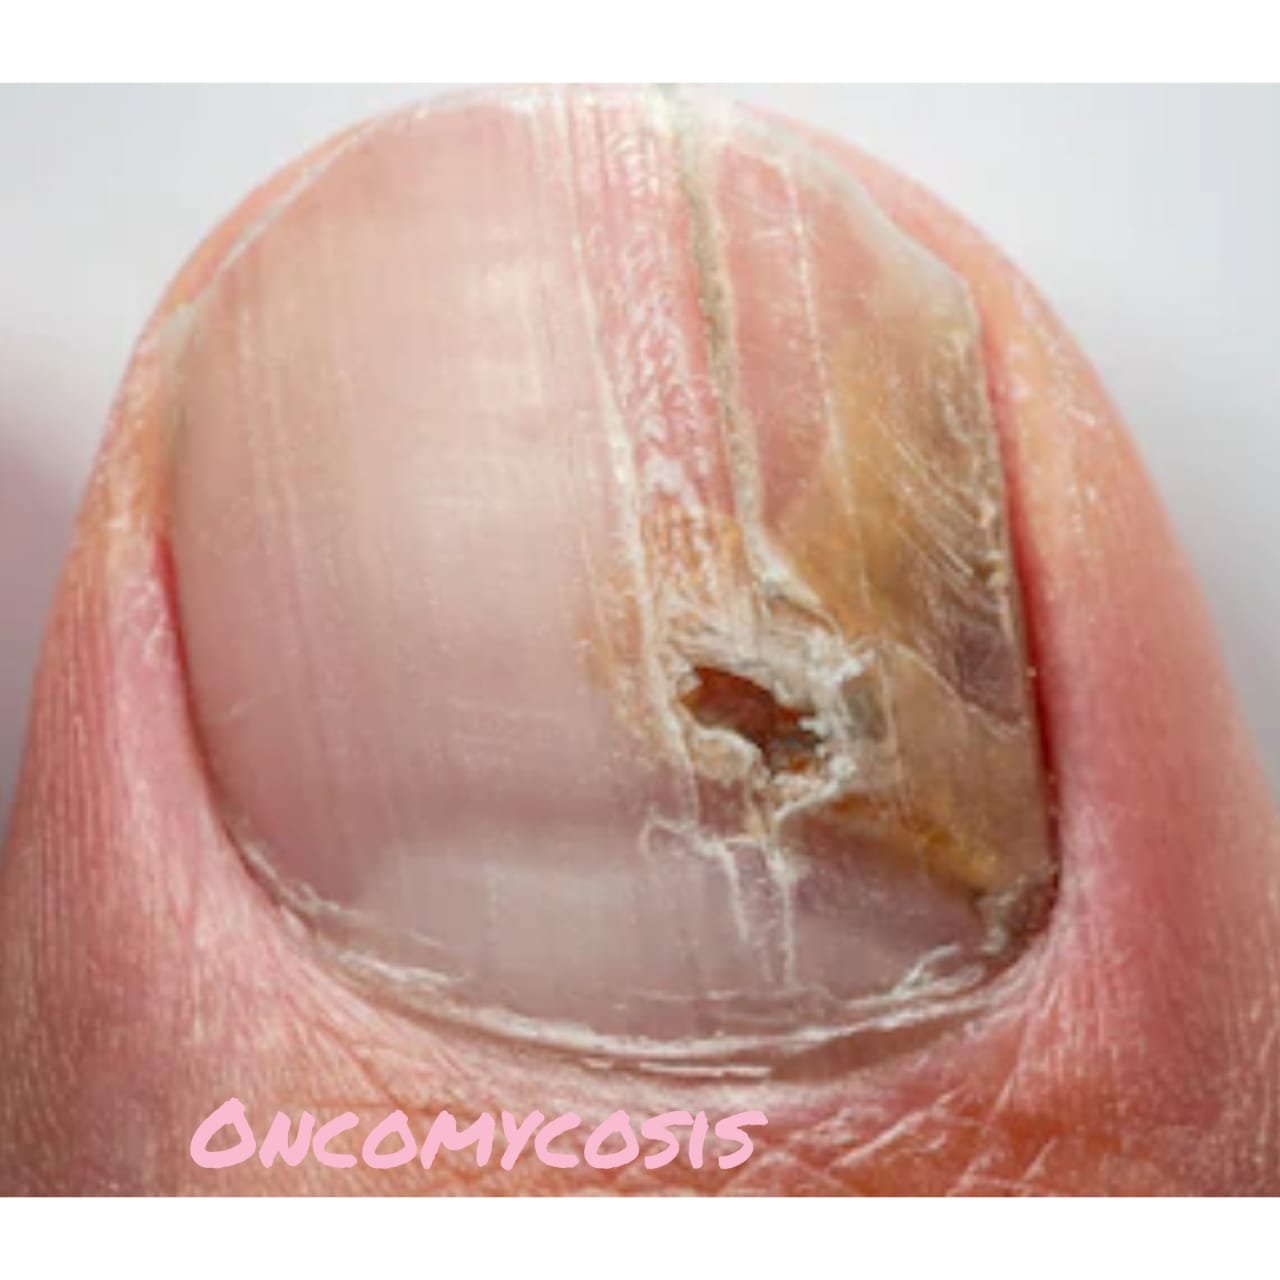 Fungal Foot Infections - The Institute of Chiropodists and Podiatrists The  Institute of Chiropodists and Podiatrists